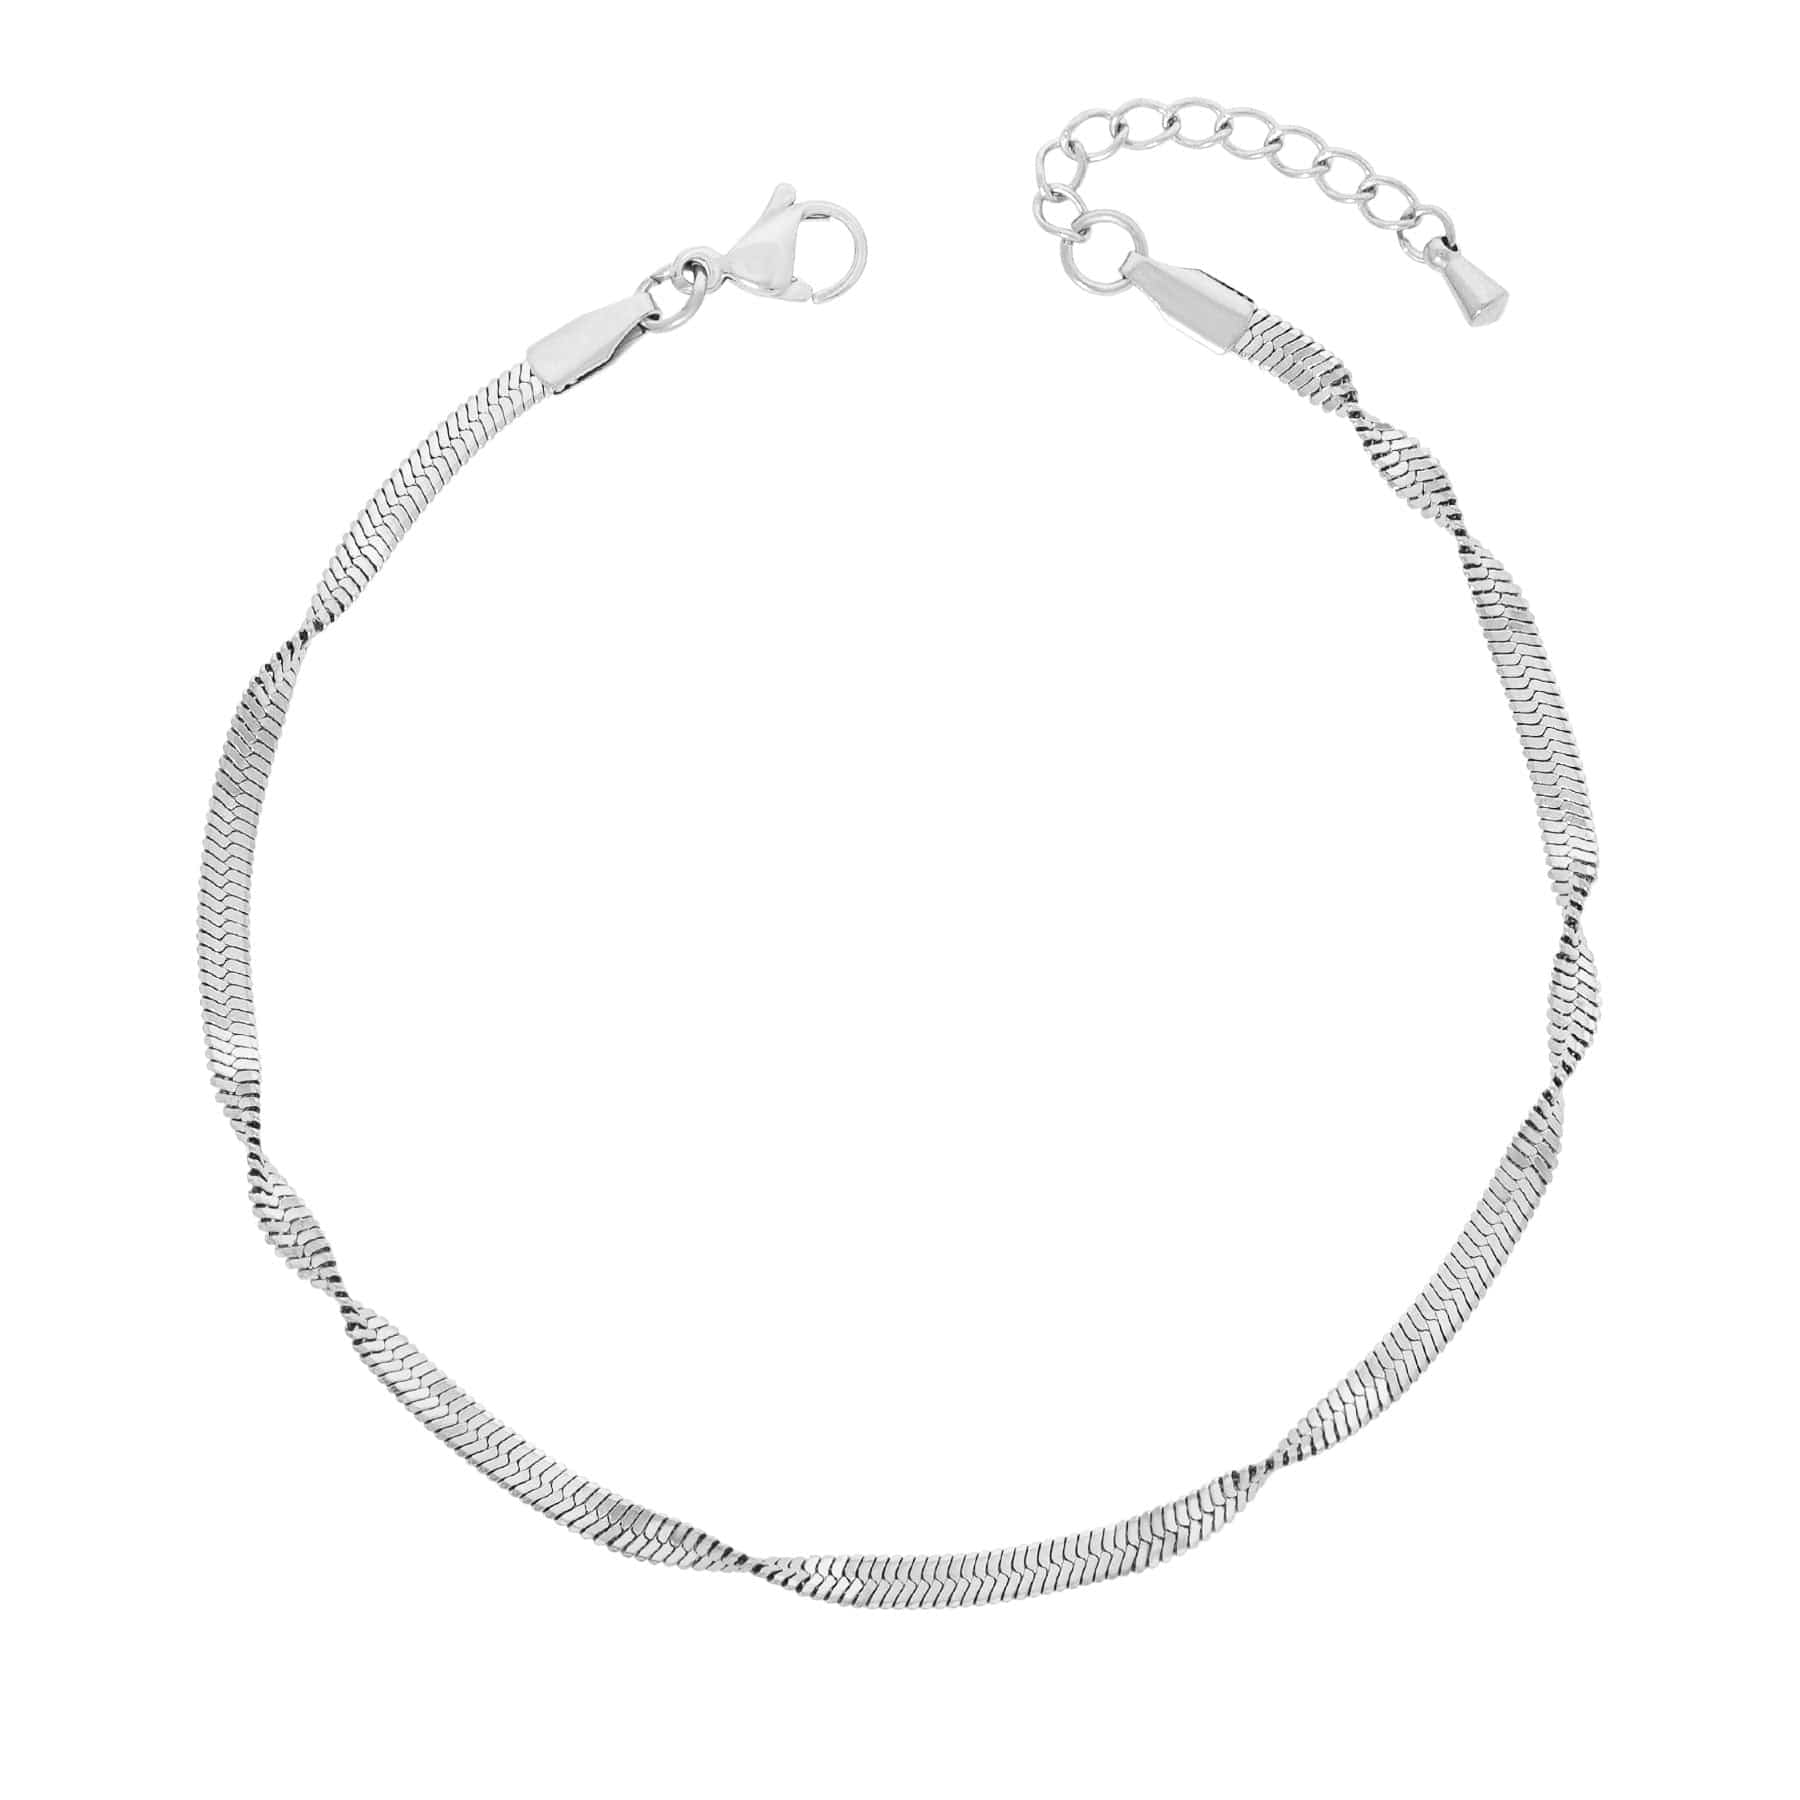 BohoMoon Stainless Steel Twist Anklet Silver